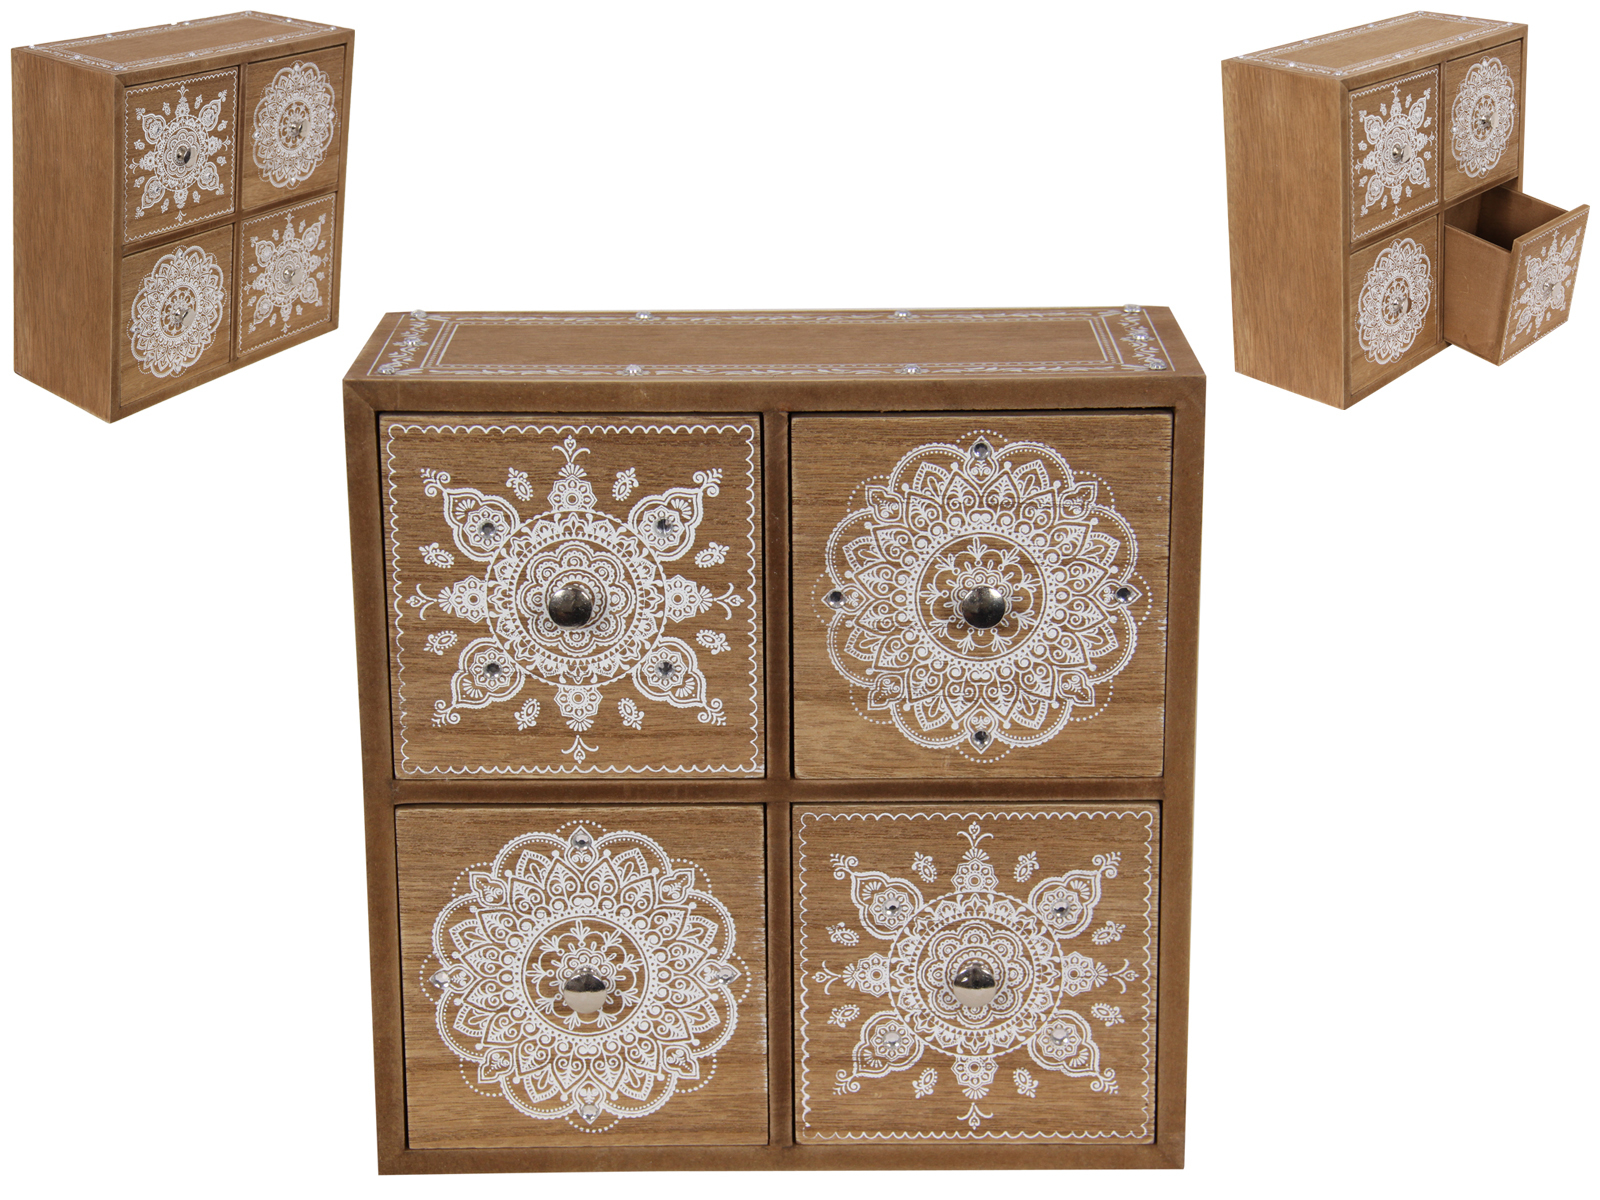 22.5cm Bohemian Style Wooden Spice Cabinet With Mandala Gem Detailing